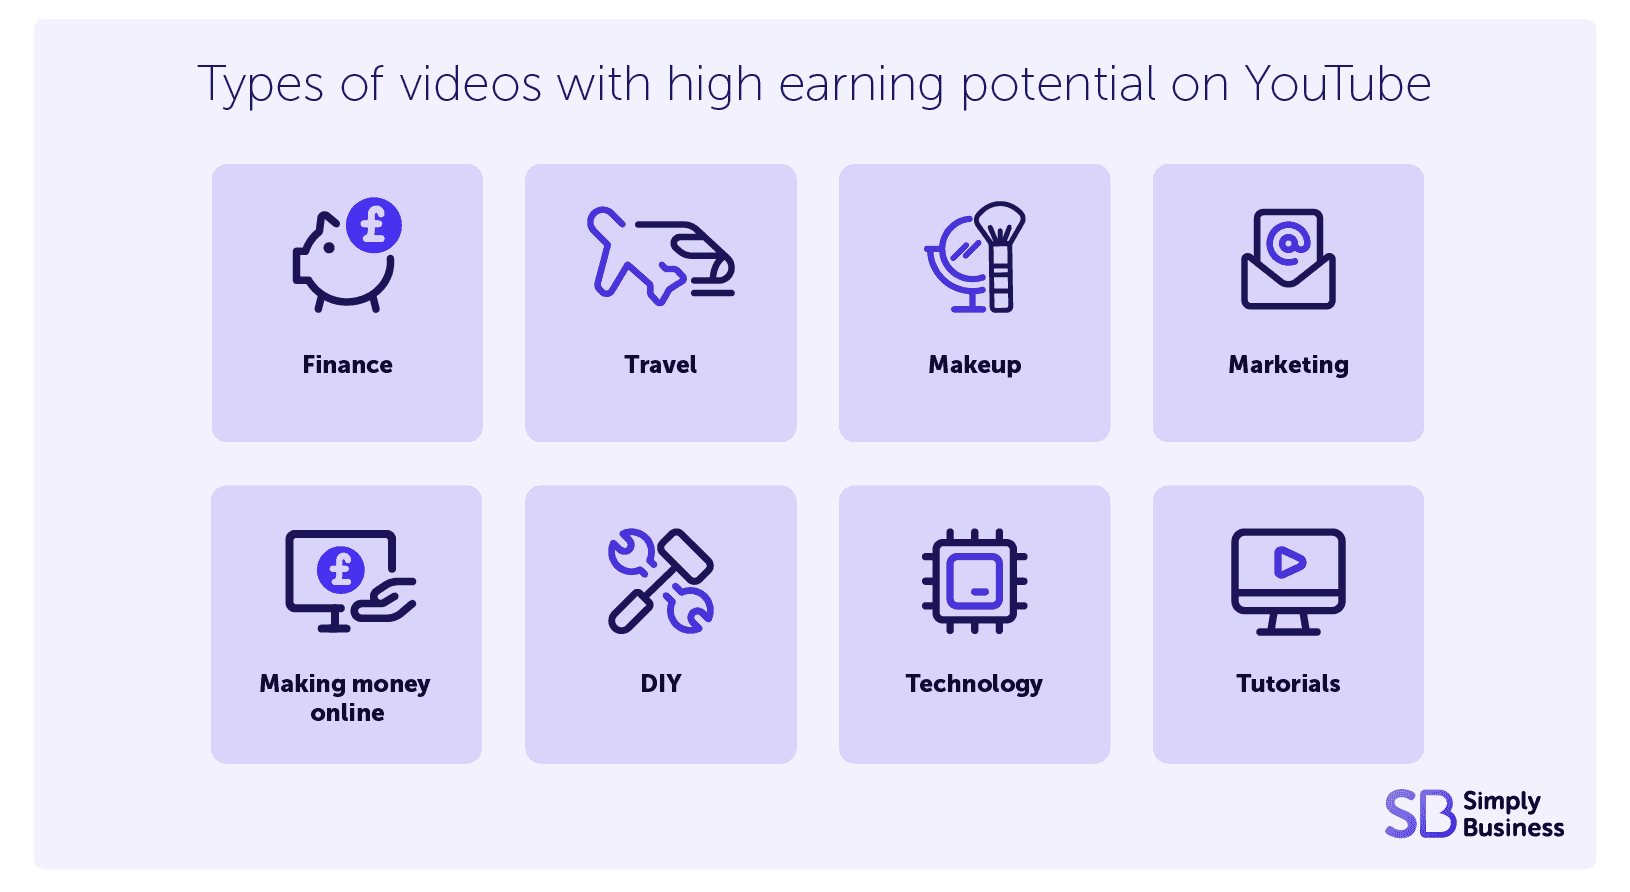 Graphic showing videos that make money on YouTube